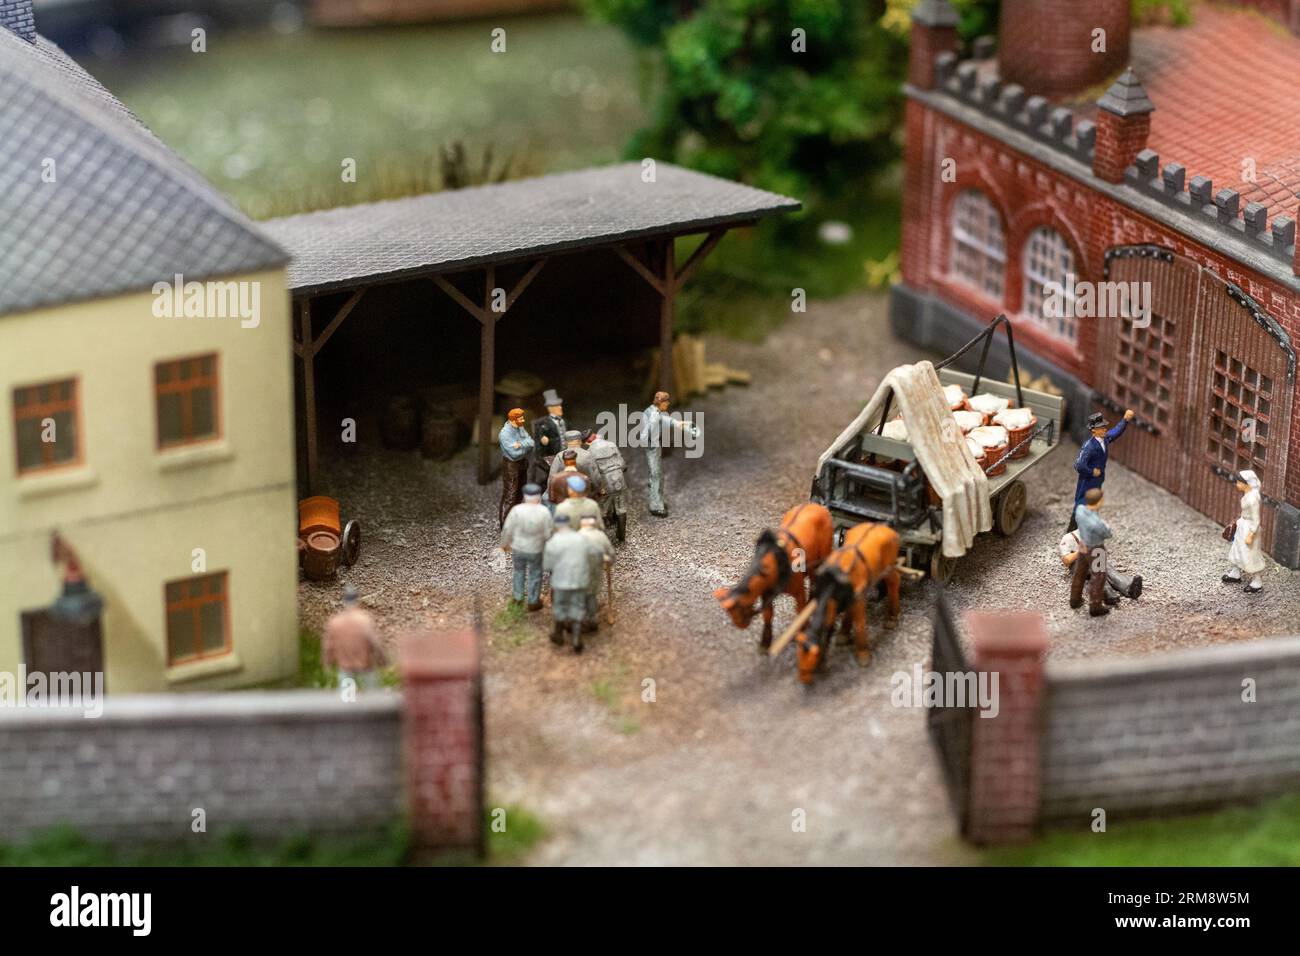 Miniature diorama at Miniatur Wunderland in Hamburg, Germany, depicting a historical scene with horse-drawn cart and people outside a factory Stock Photo